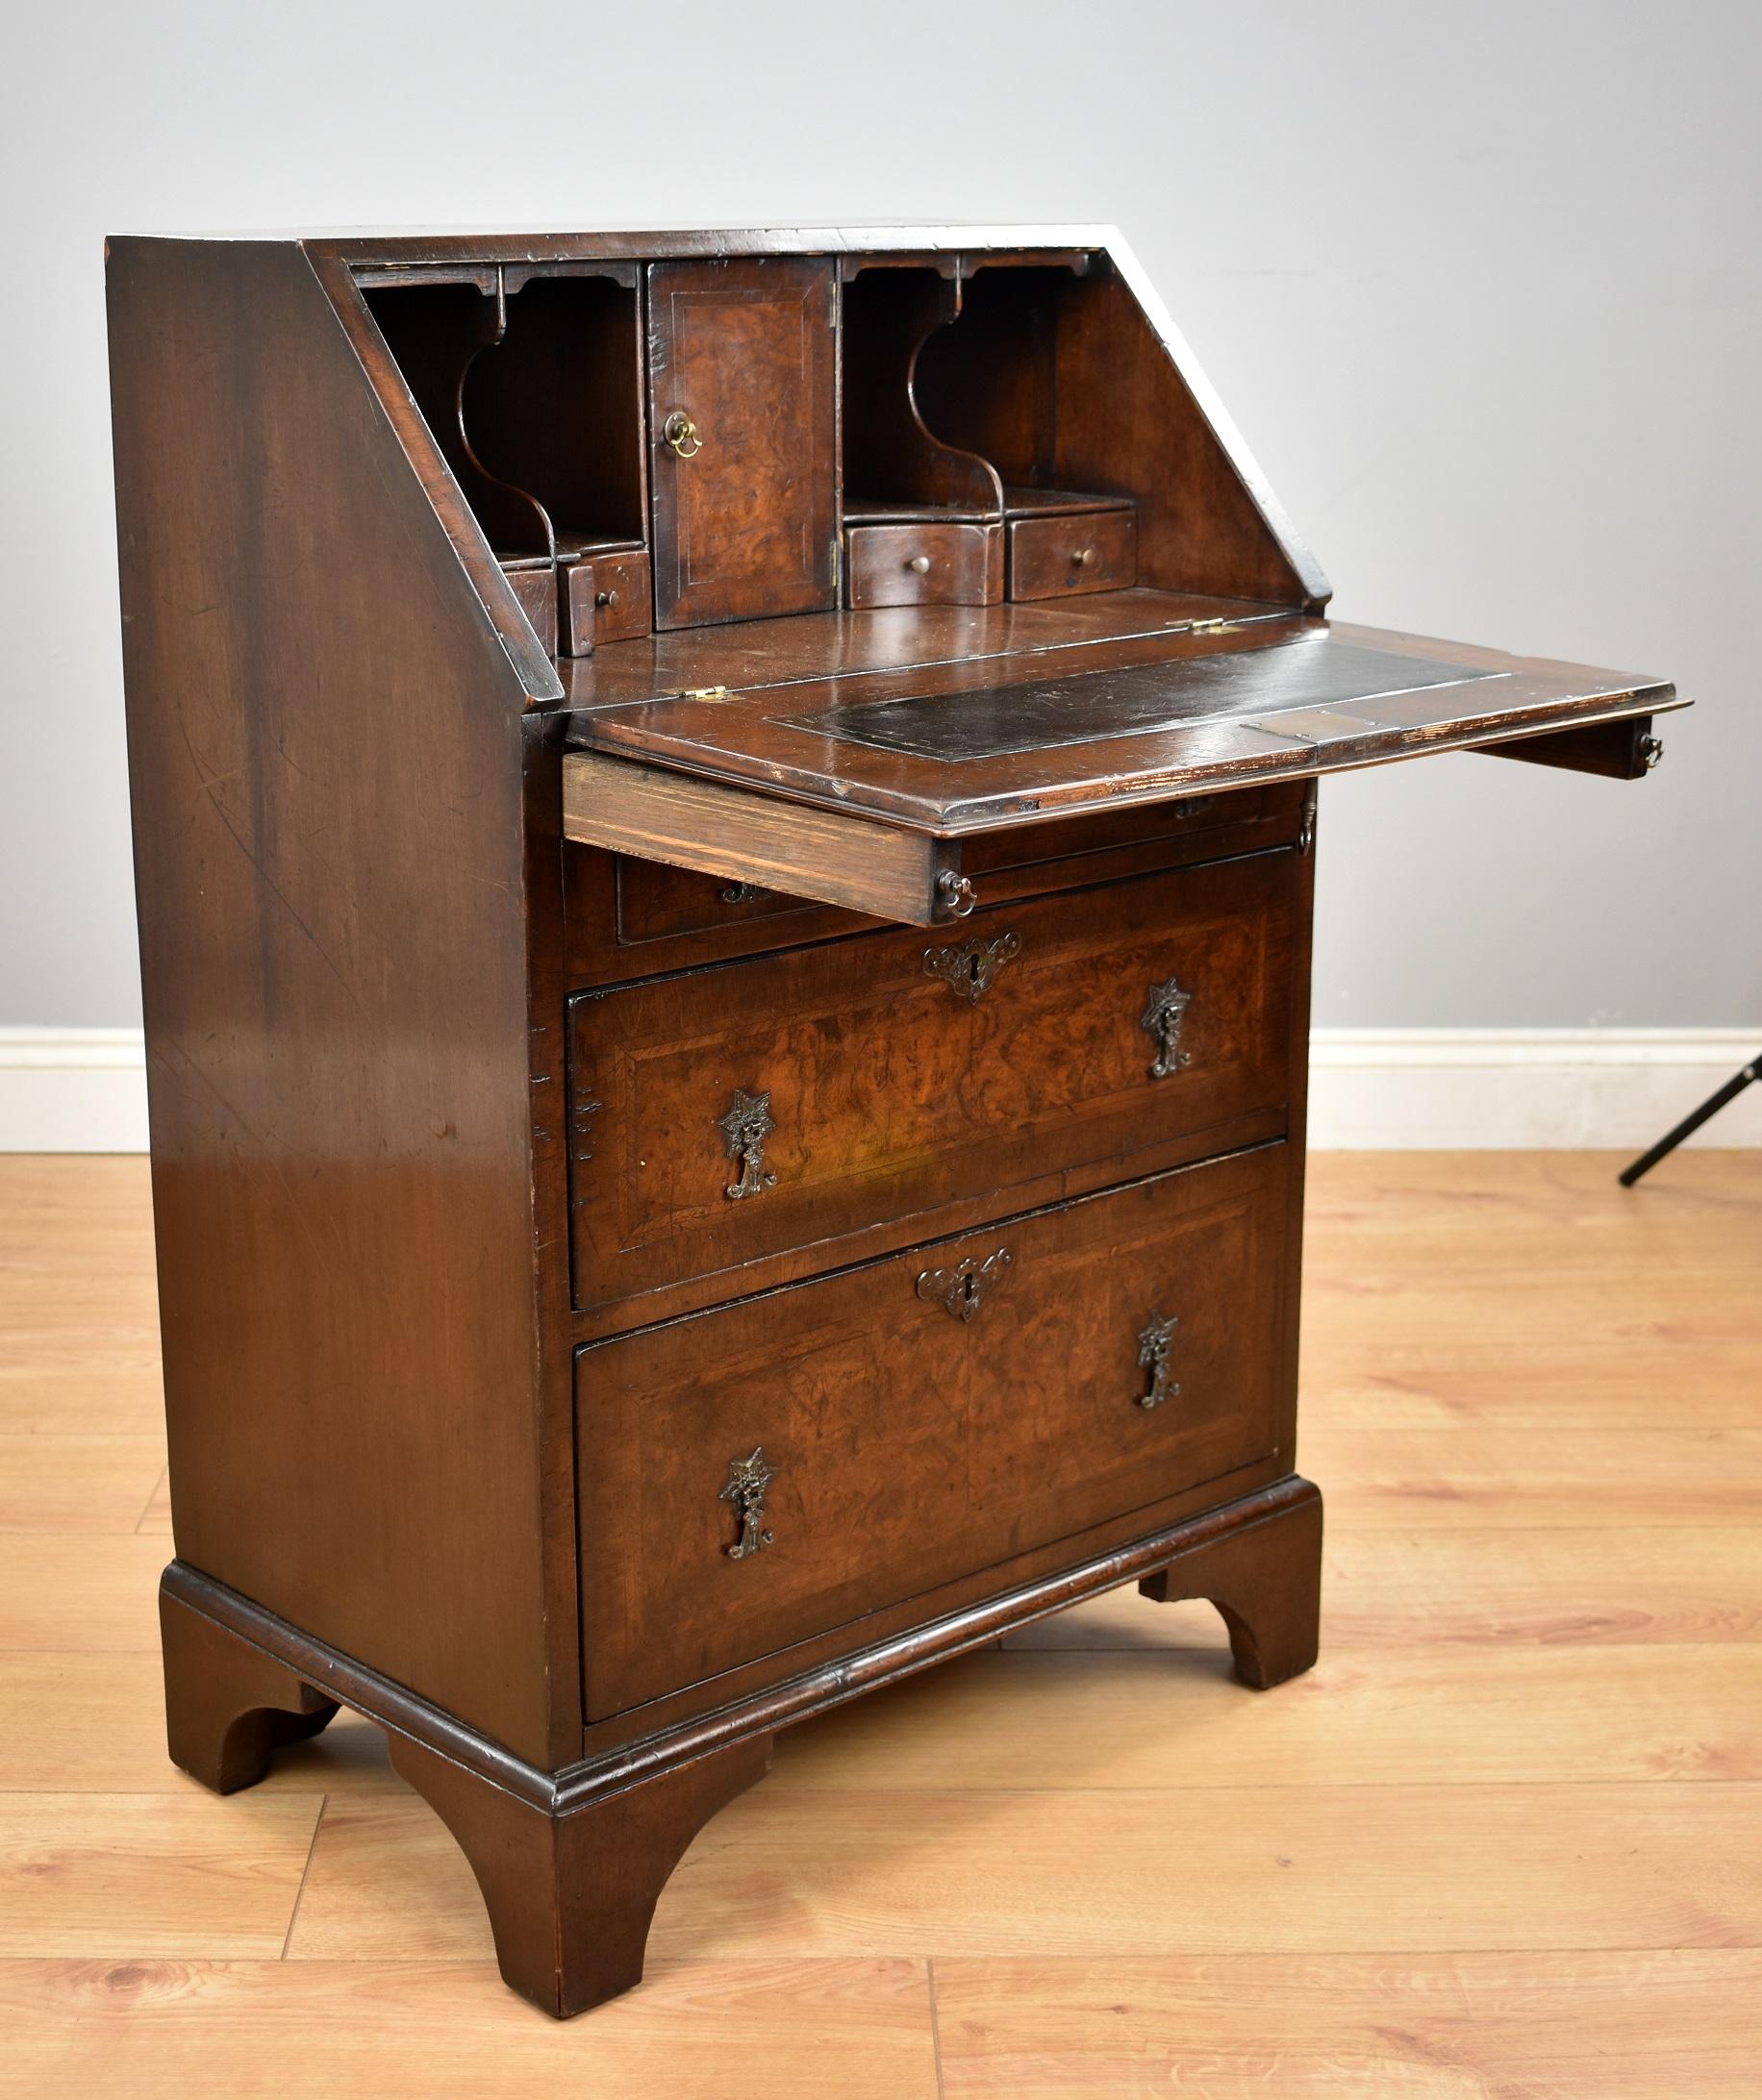 For sale is a good 19th century burr walnut bureau of small proportions. The top having walnut banding as well as herringbone inlay. Below this, the fall also has walnut banding and inlay, opening to reveal a fully fitted interior comprising shaped